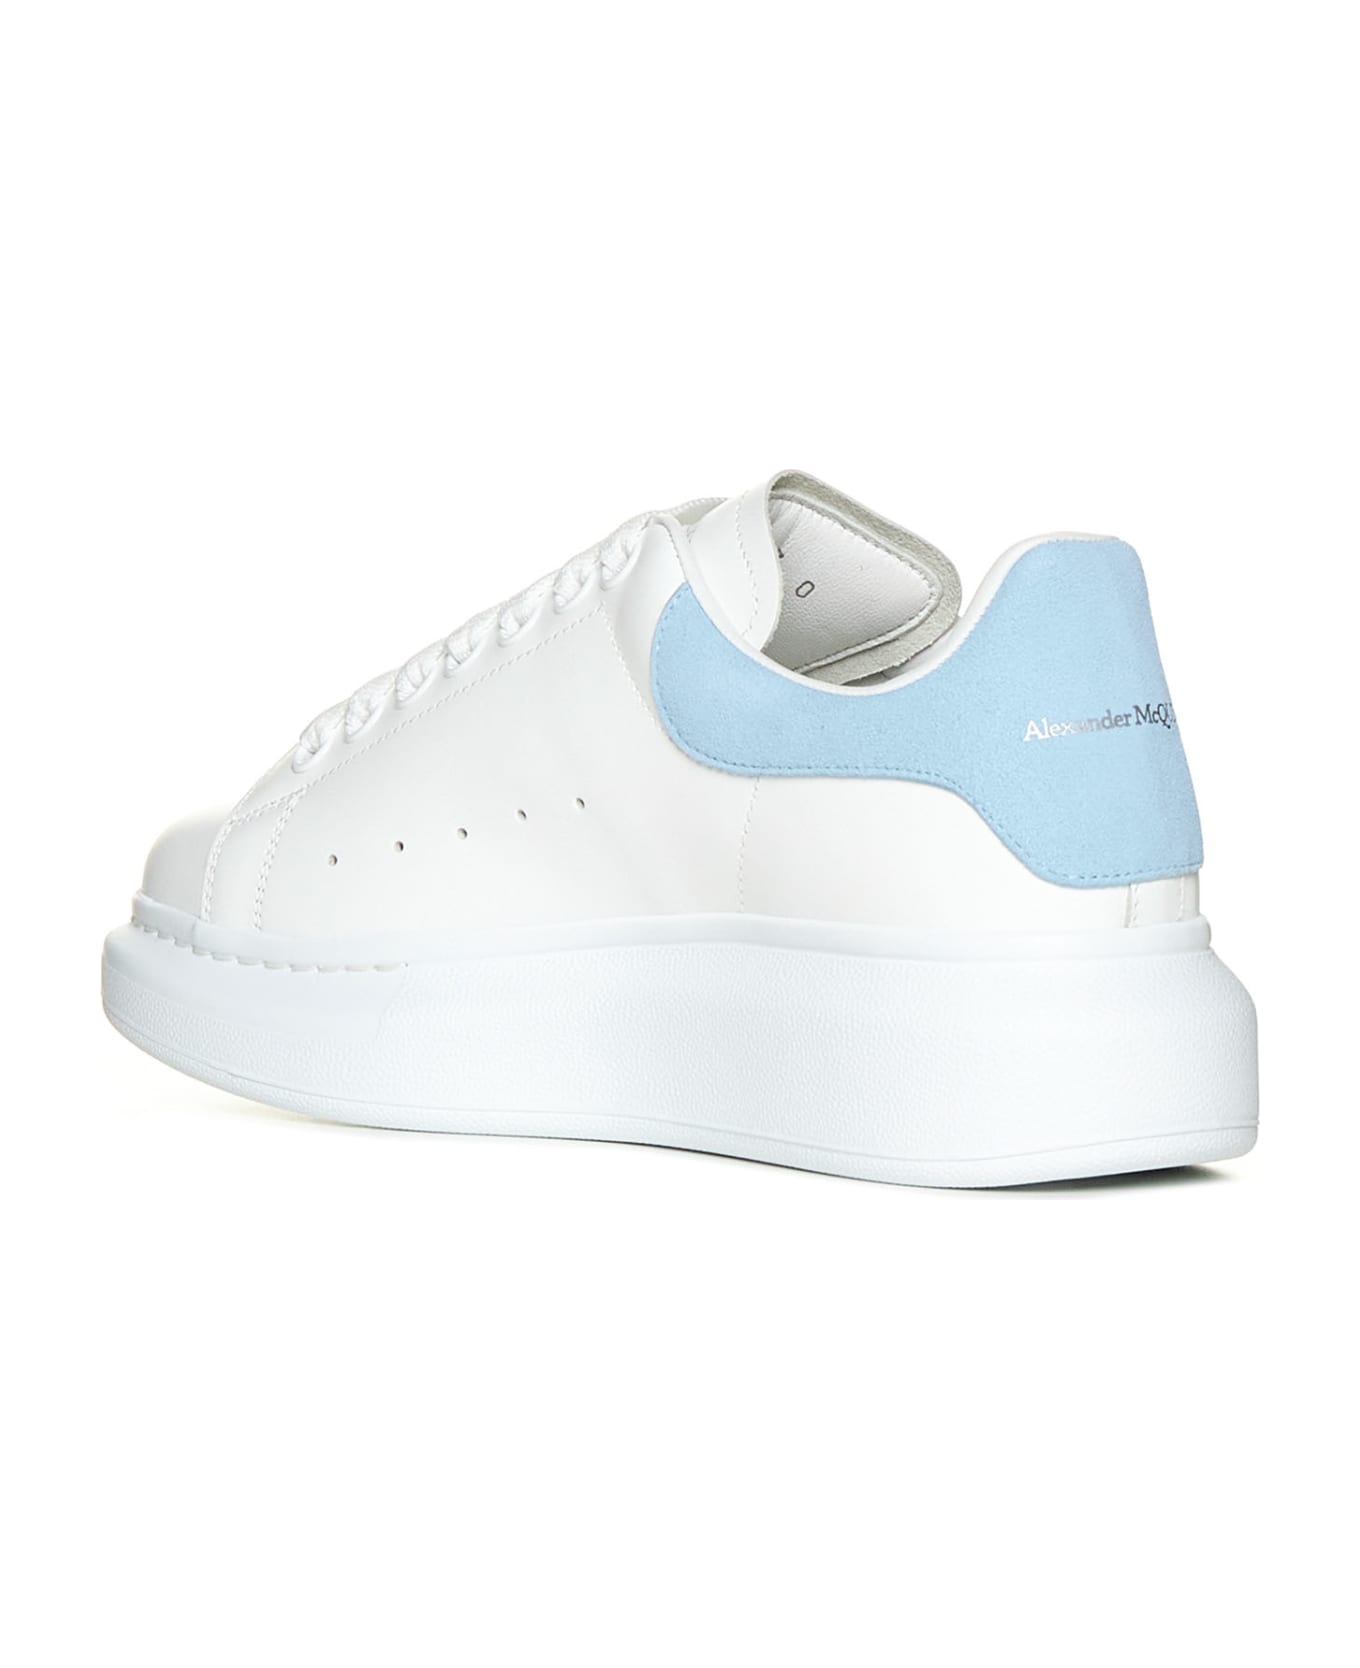 Alexander McQueen Sneakers In Leather And Light Blue Heel - White/powder Blue